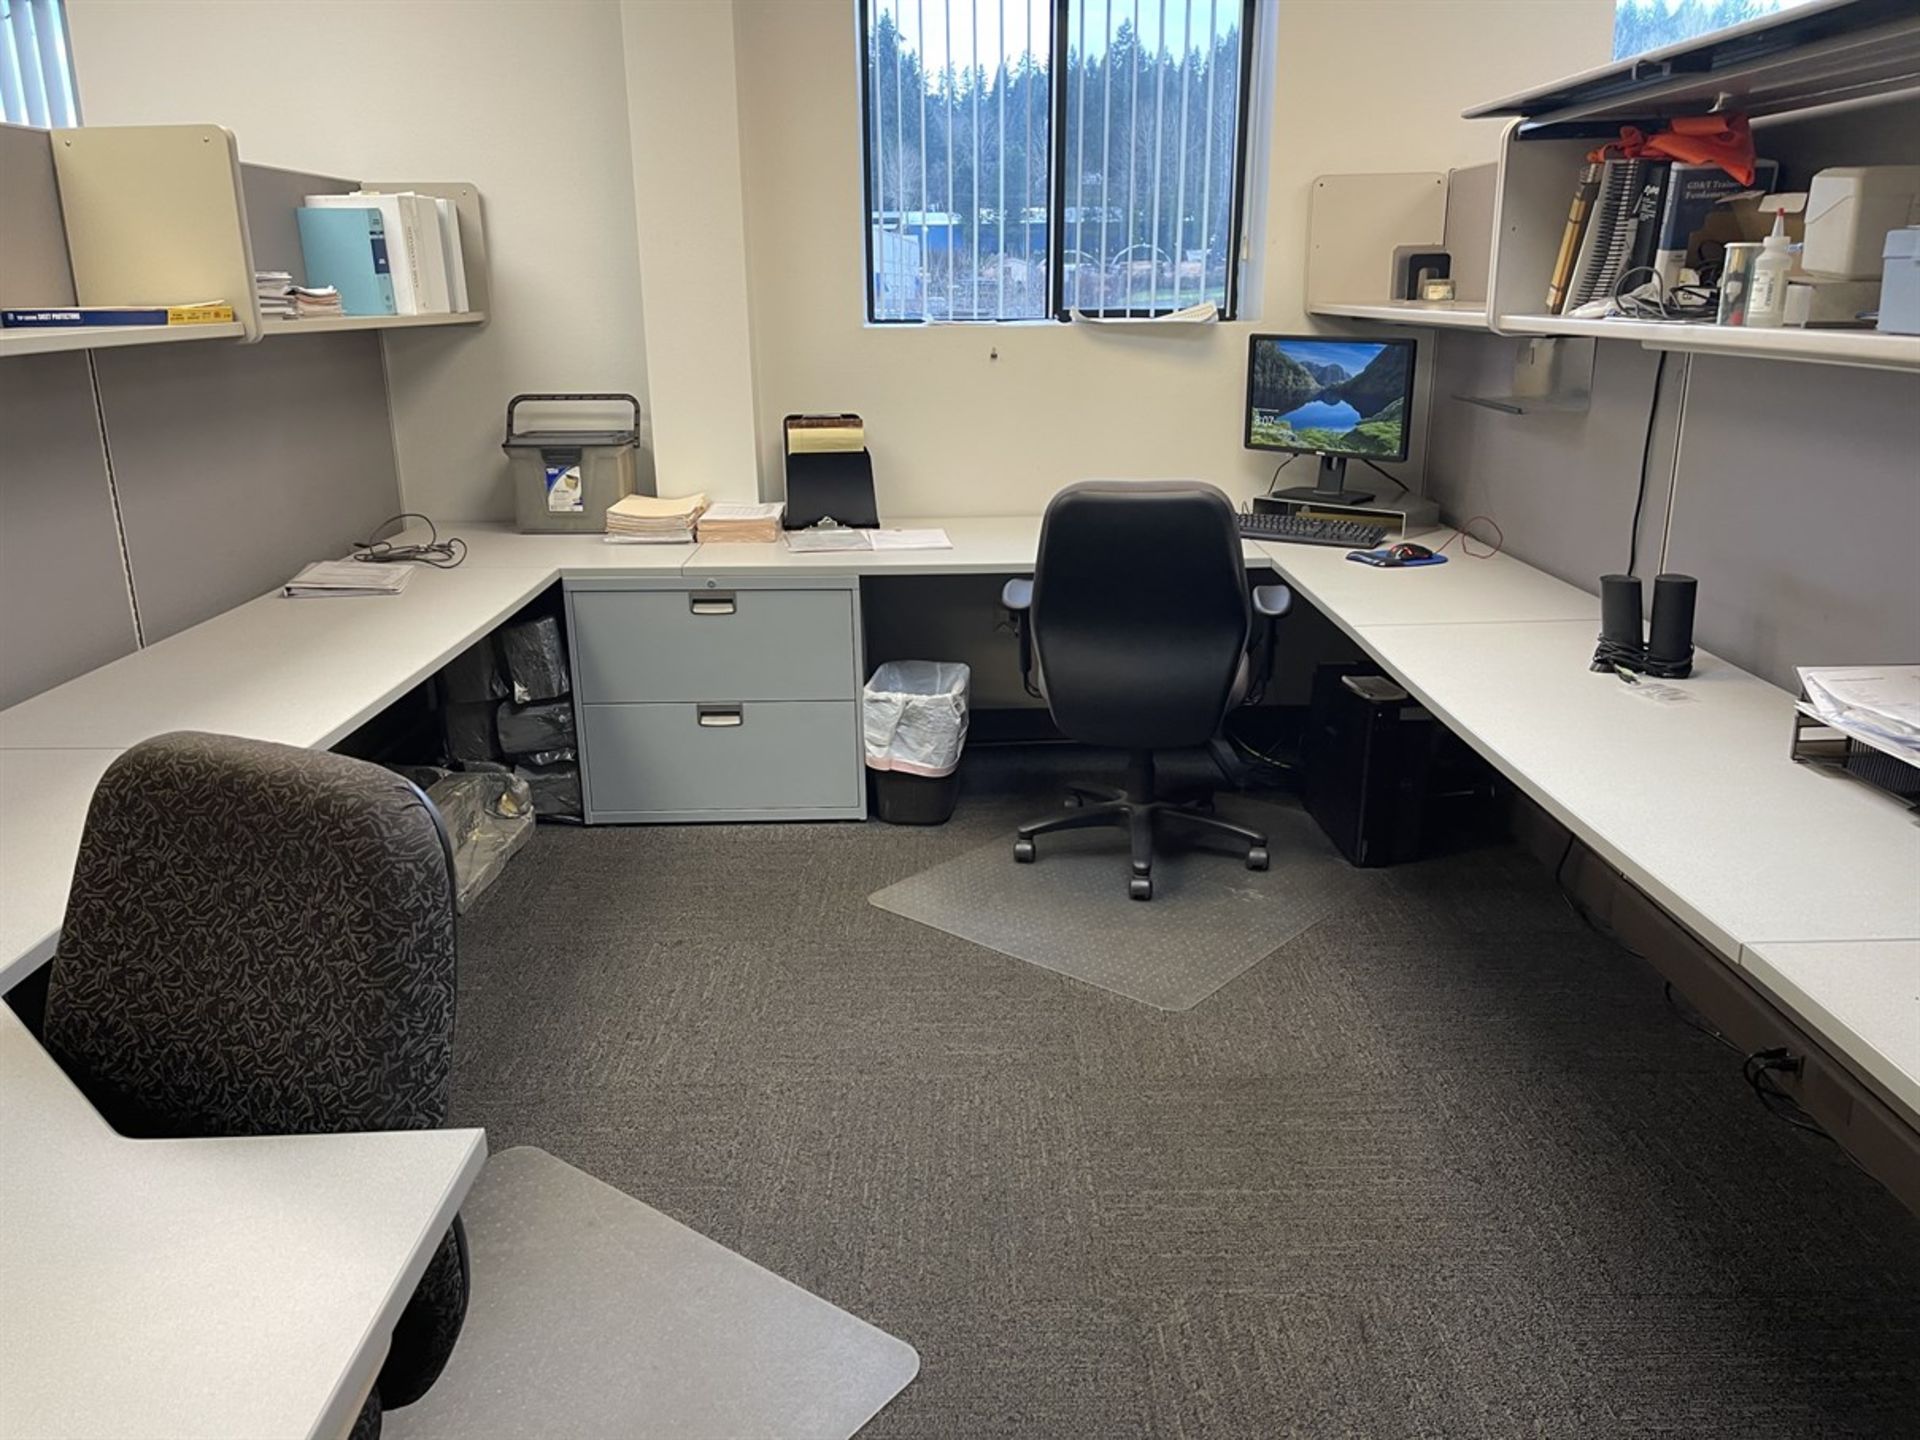 Office Area Comprising Large Cubicle Systems w/ Wall, Desks, and Chairs, (No Electronics or - Image 4 of 5